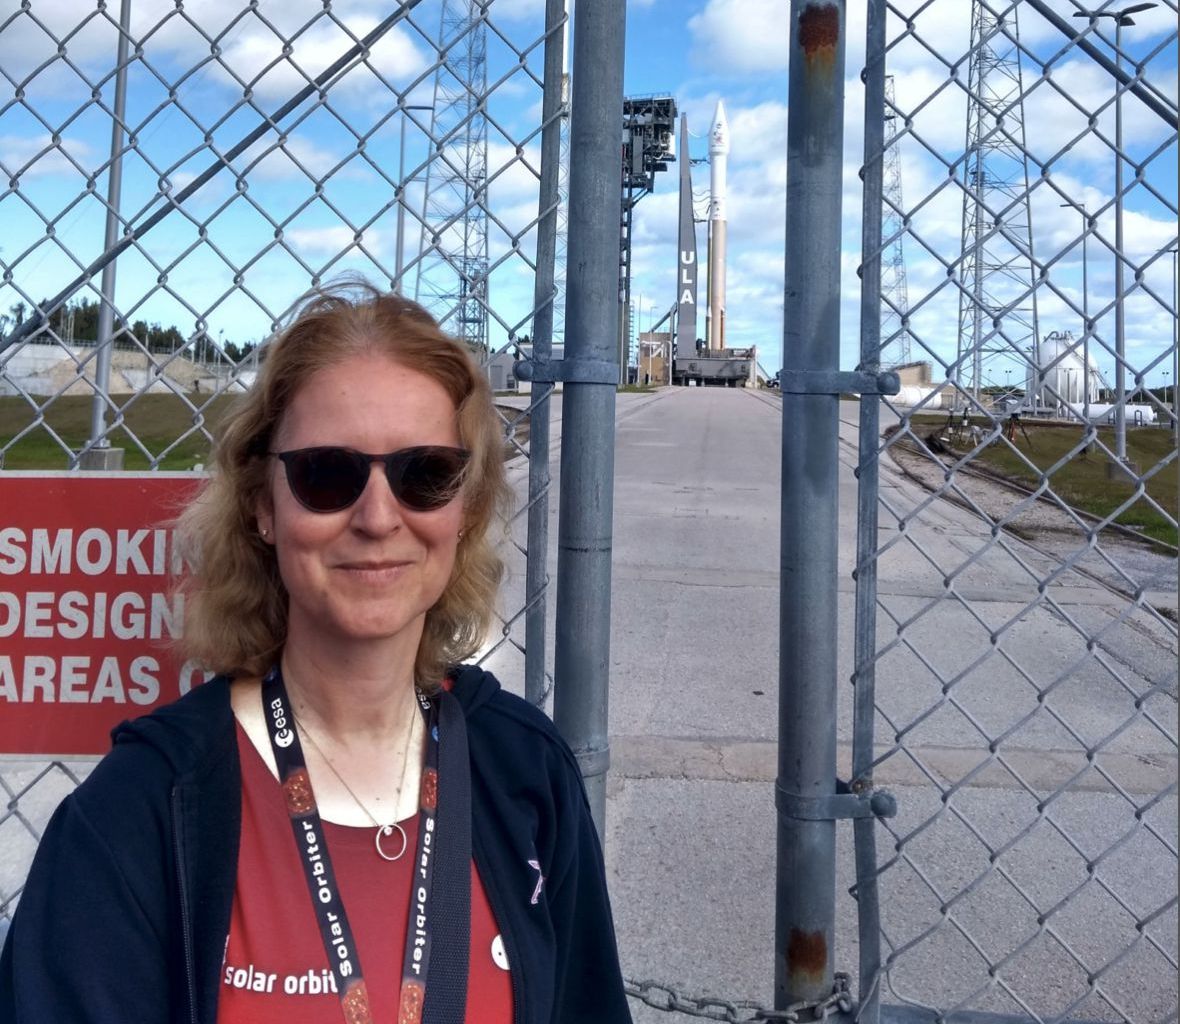 Prof. Louise Harra in Cape Canaveral in Florida (USA) in February 2020 at the launch of the Solar Orbiter space probe, which scientists are using to study the activities on the surface of the sun.